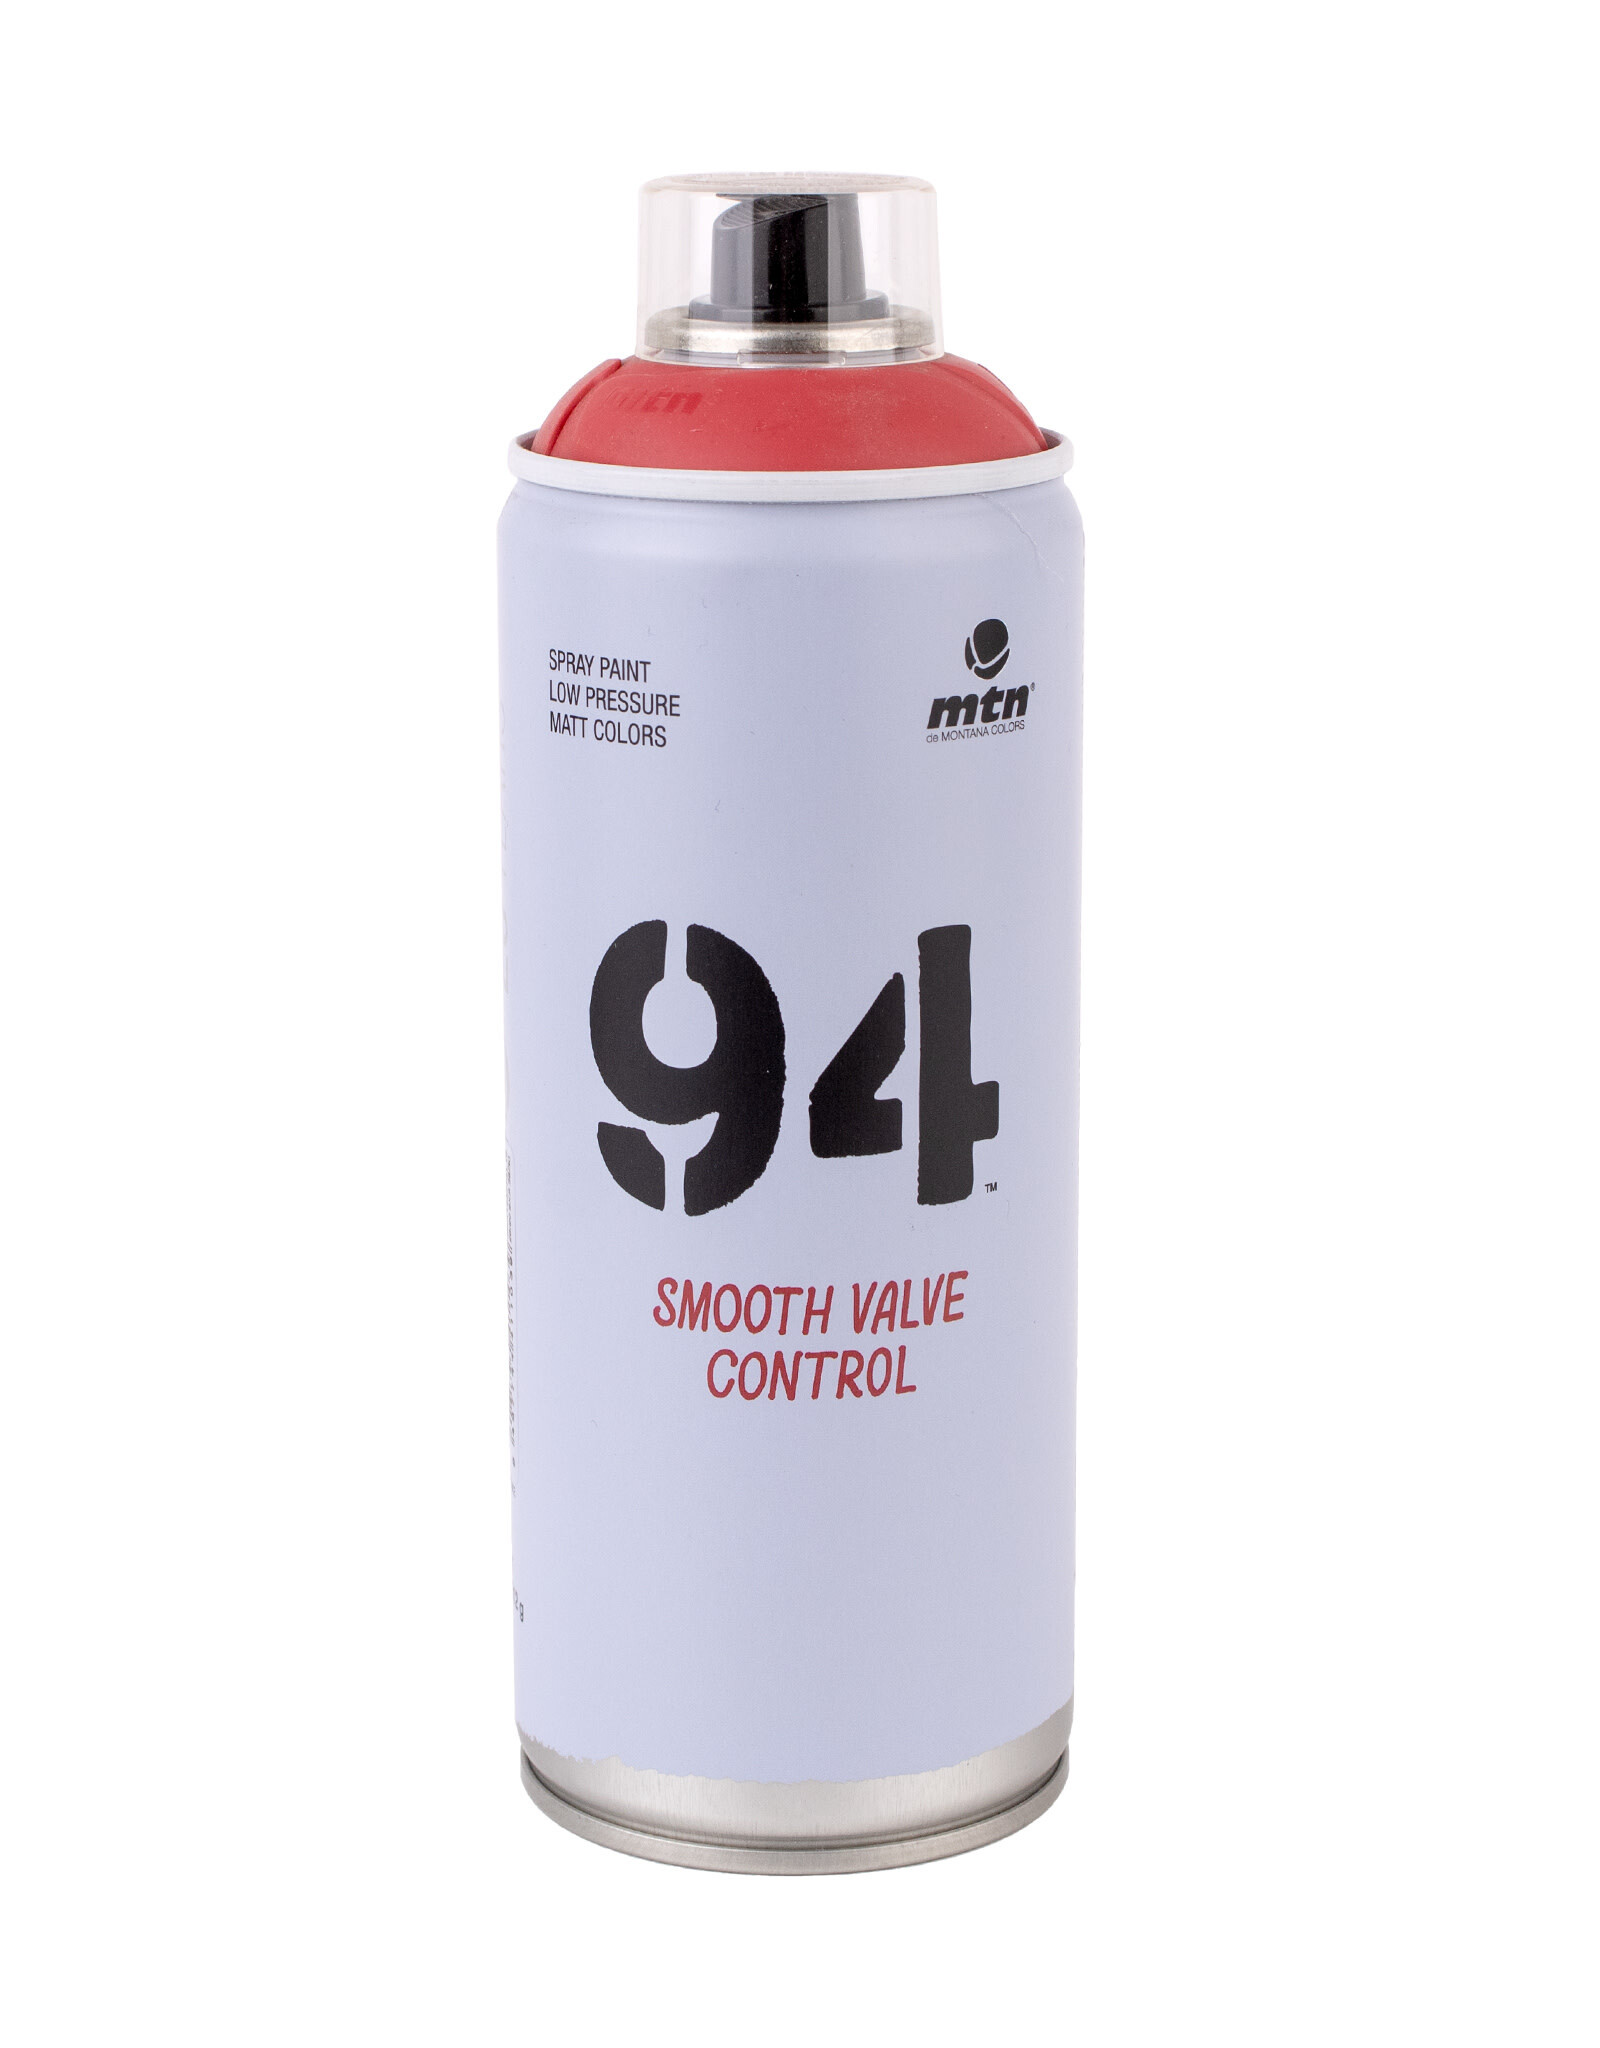 mtn 94 MTN94, Blood Red